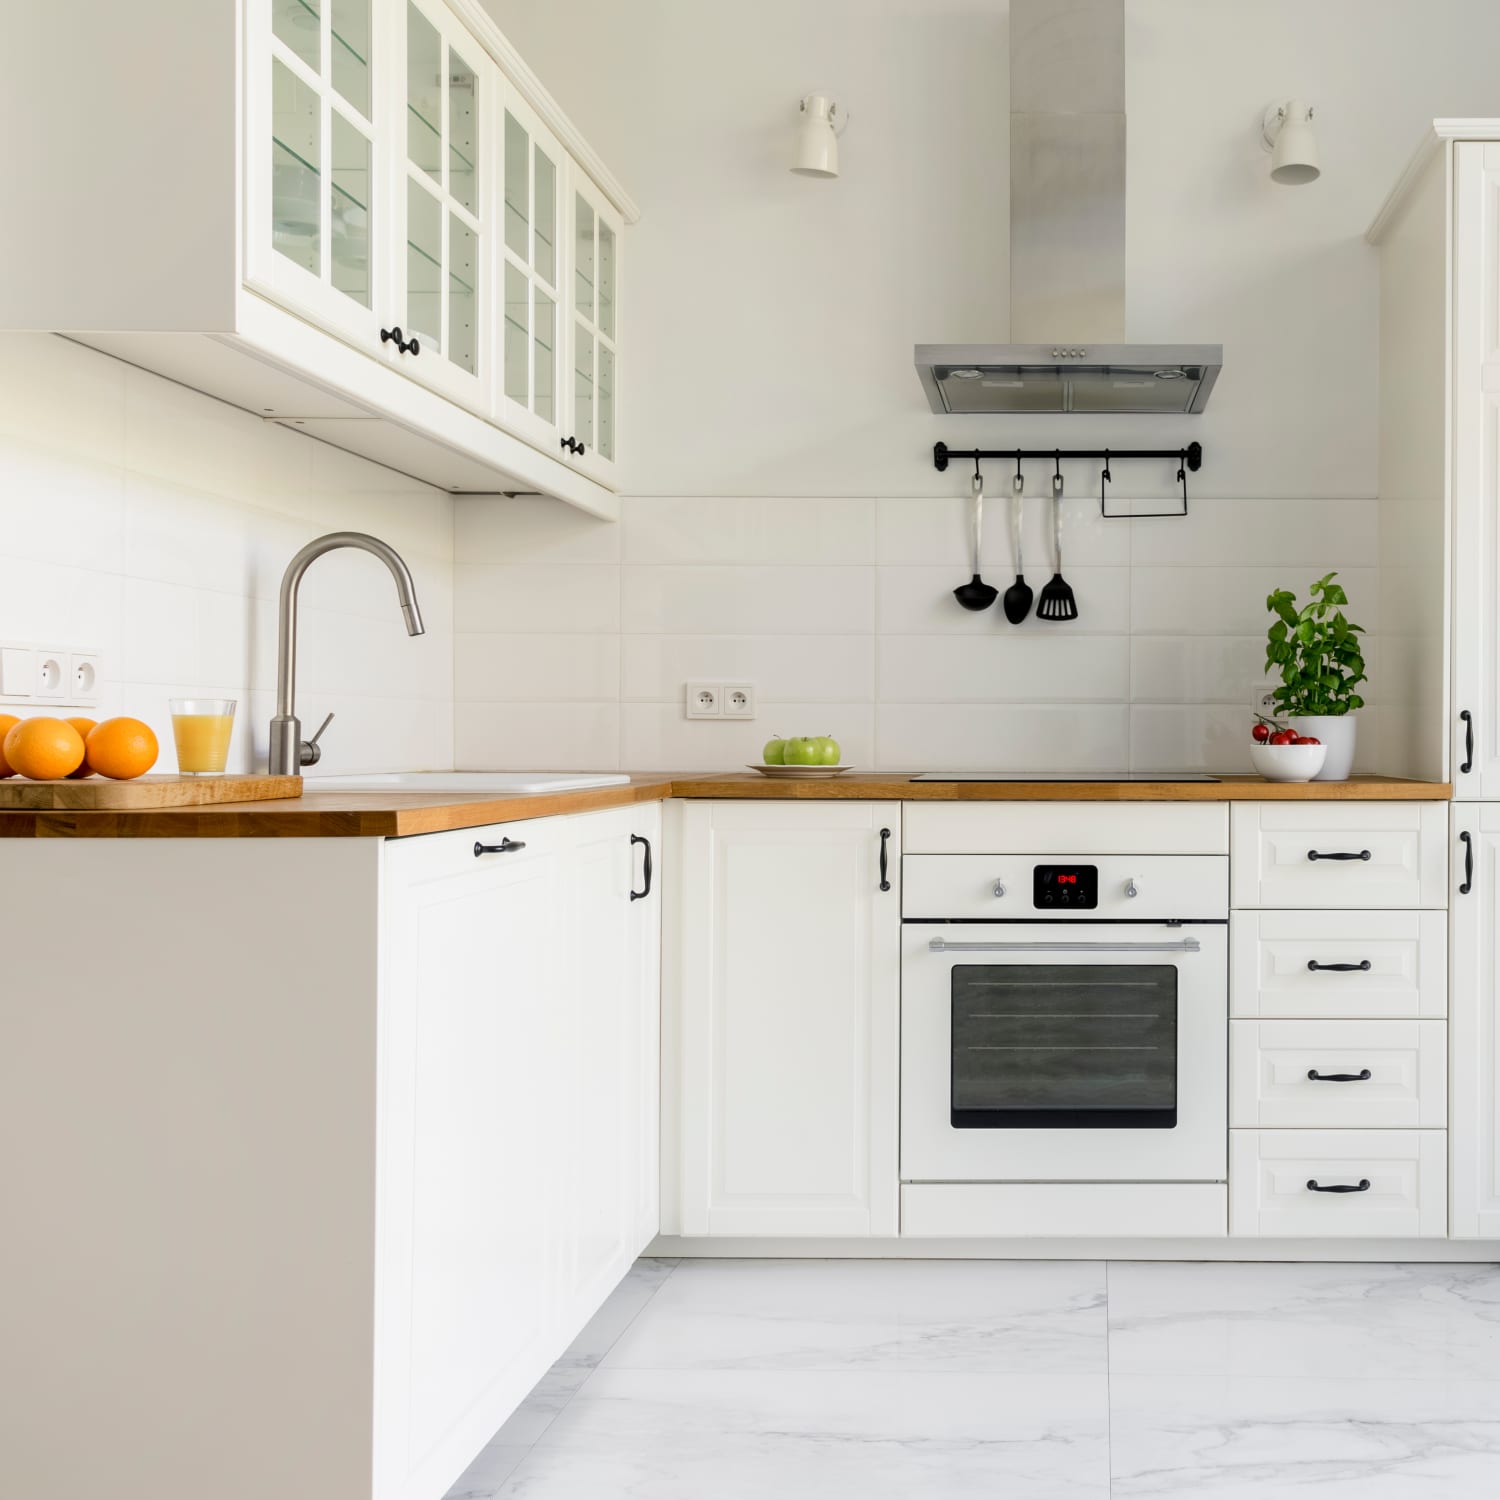 11 Ways to Phase Out a White Kitchen, According to Designers